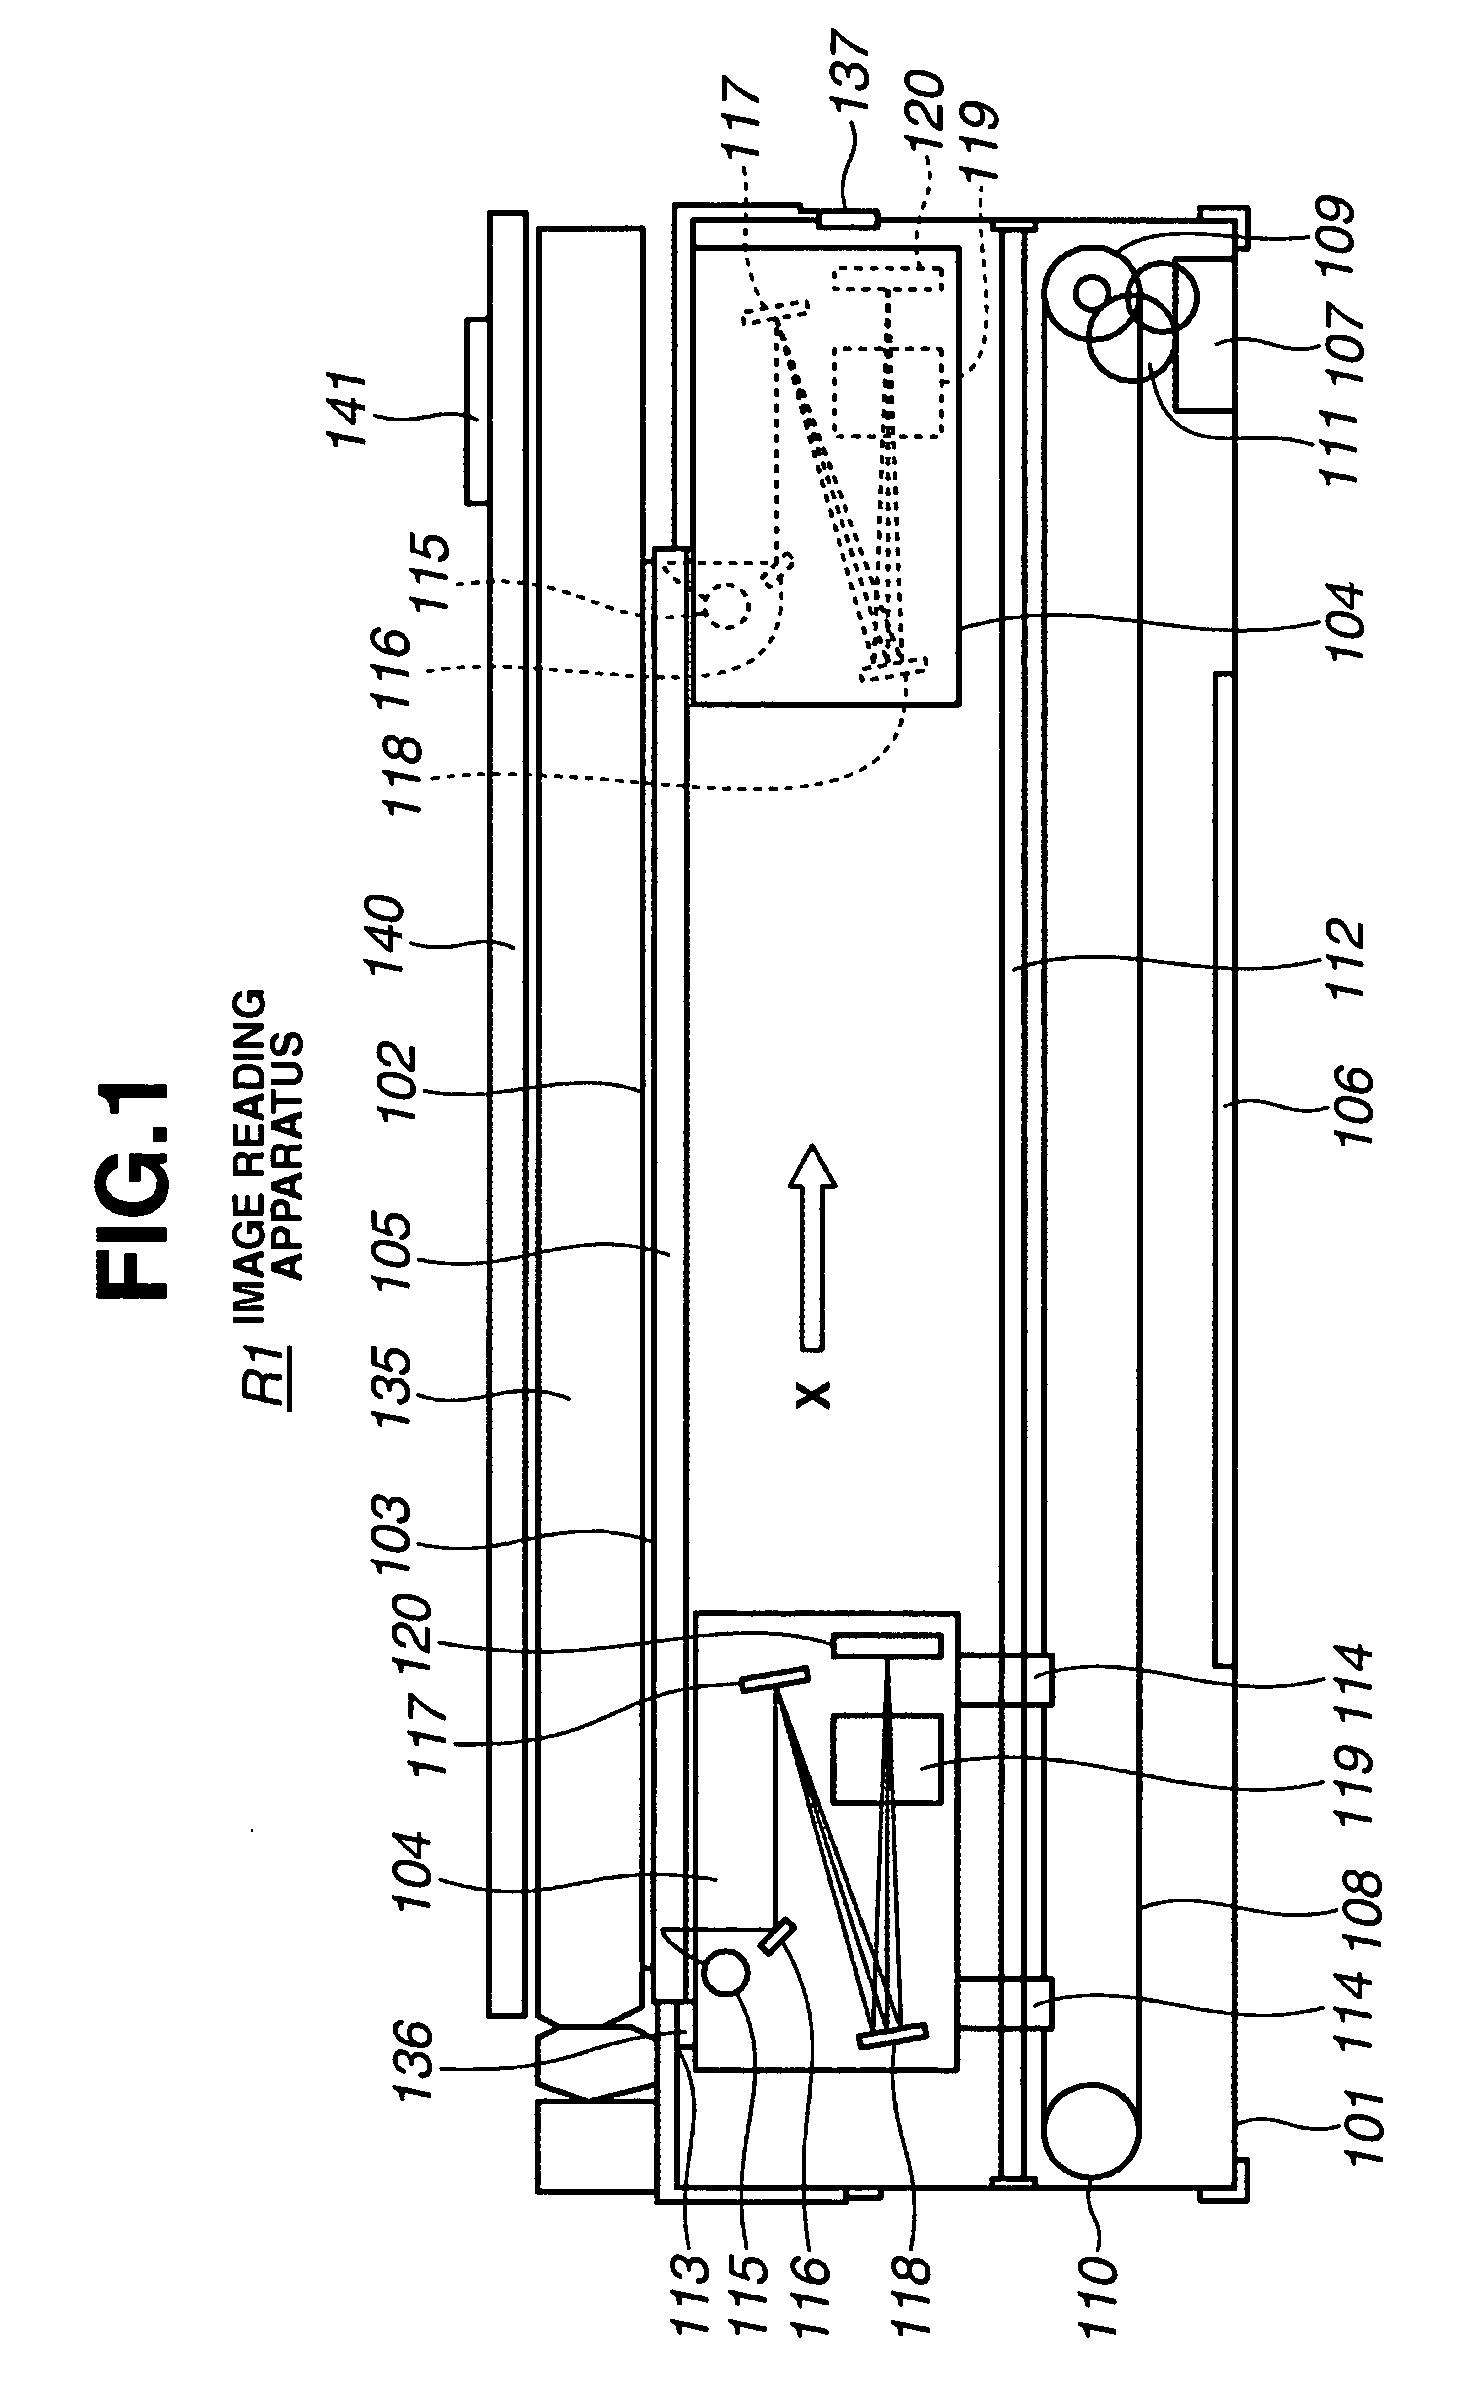 Image processing apparatus and its program and control method